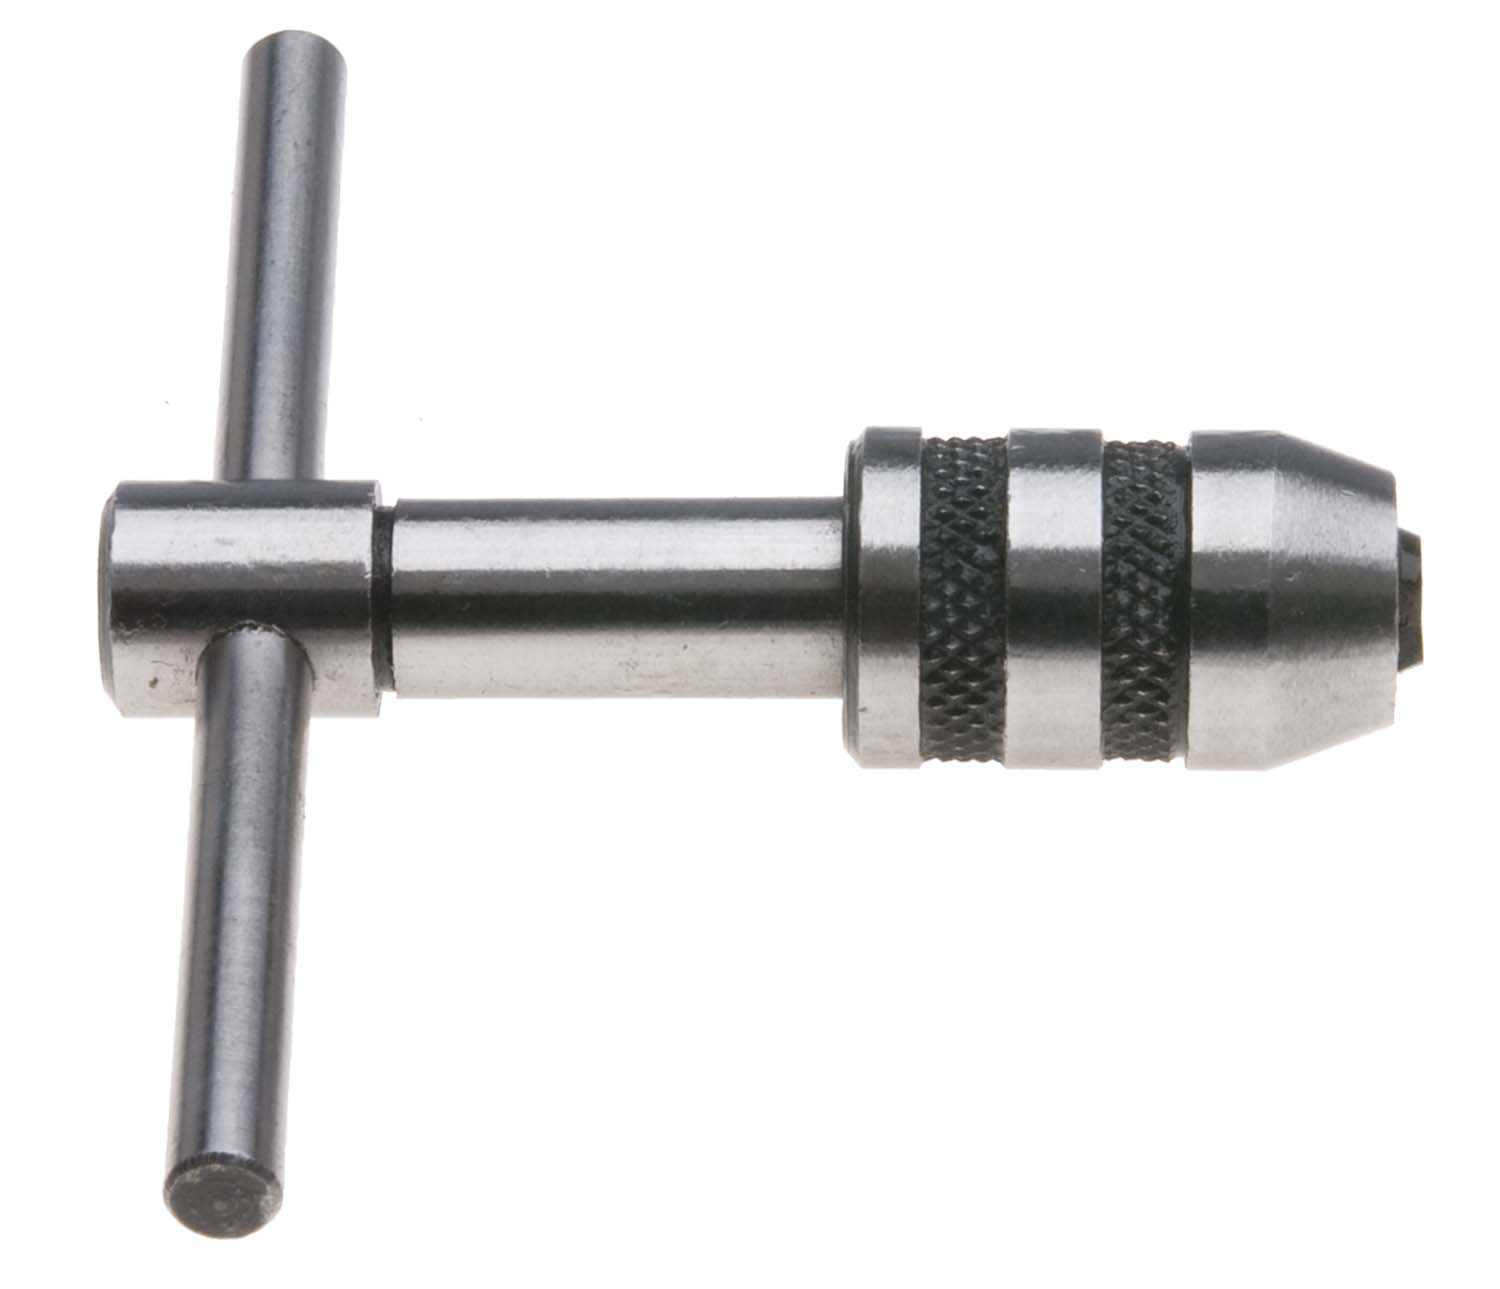 MT-057   Plain T-Handle Tap Wrench for 1/4 - 1/2" taps